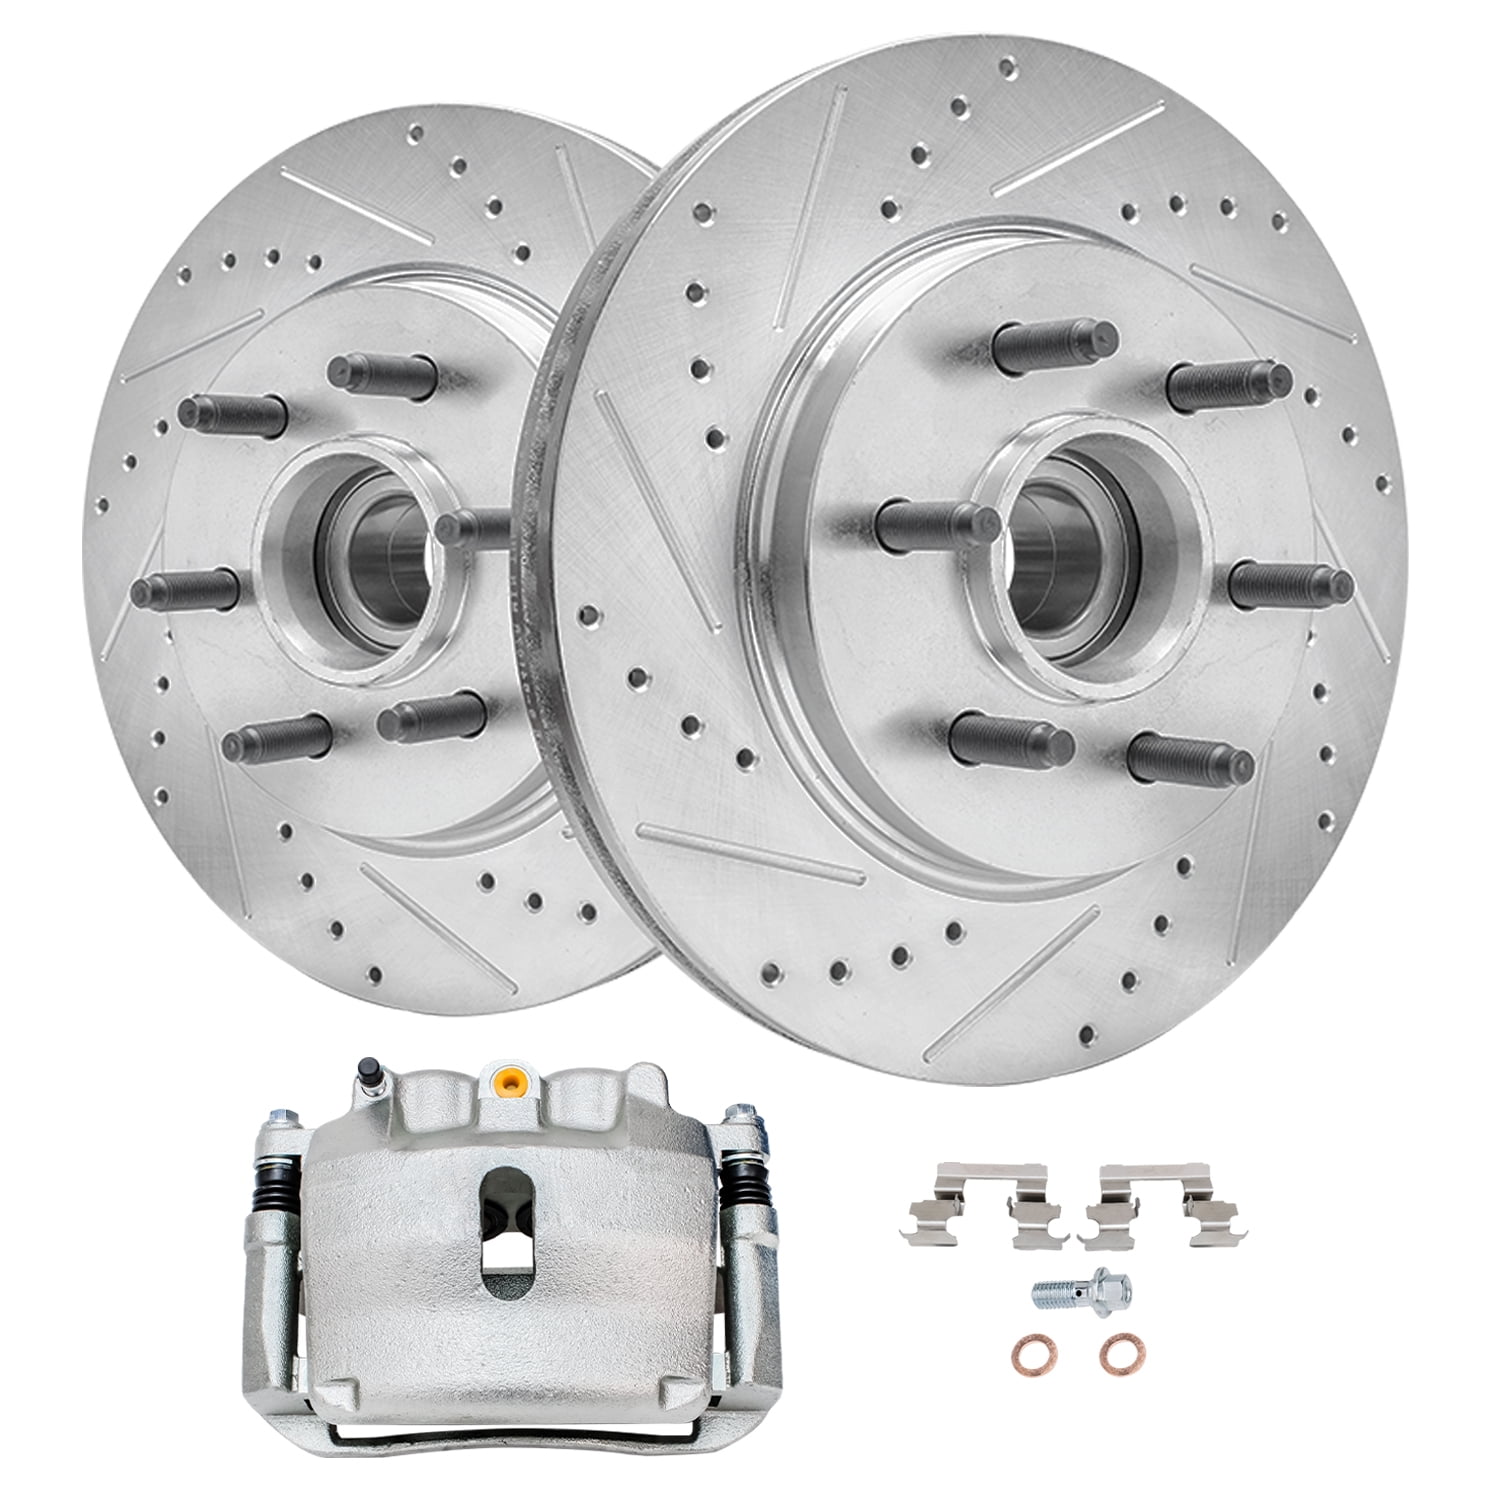 Detroit Axle - 2WD 6-Lug Front Drilled & Slotted Rotors Left Brake Caliper  Replacement for 2004 2005 Ford F-150